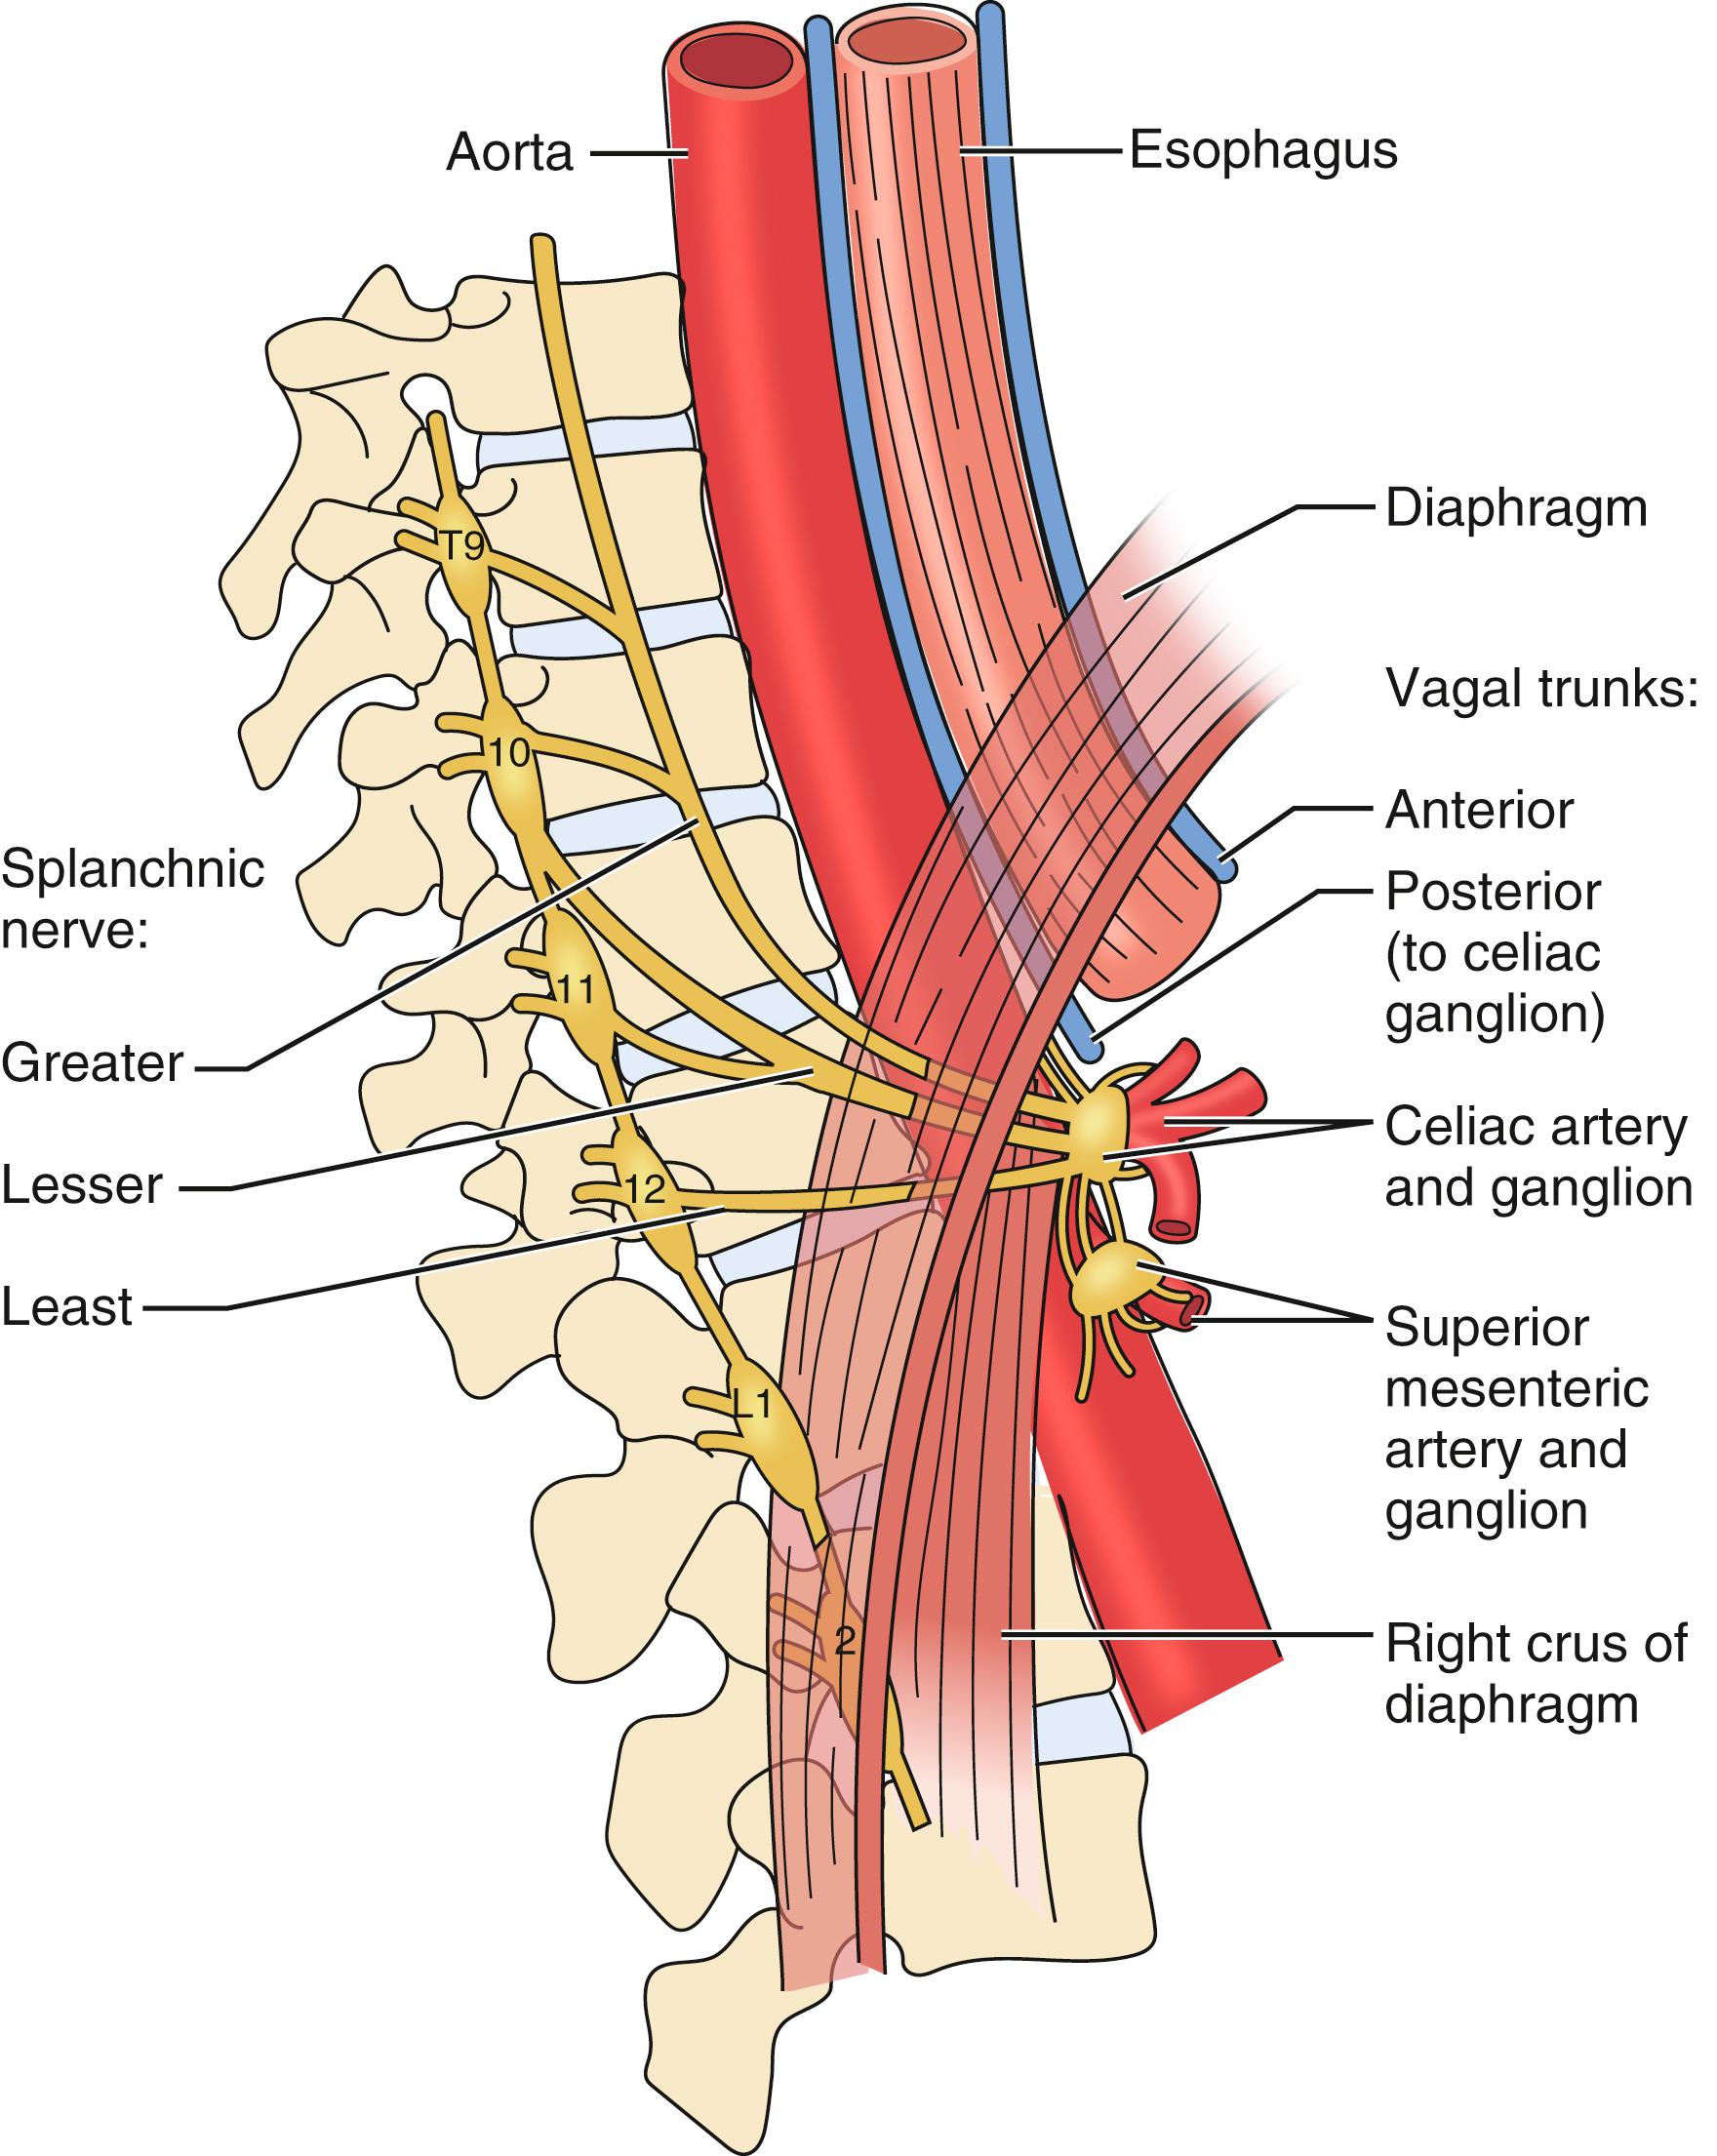 Figure 136.3, Artistic rendering of a sagittal view of the median arcuate ligament and proposed neural networks entering and exiting the celiac ganglion and plexus. Compression of the celiac axis by the median arcuate ligament simultaneously can cause compression of the celiac ganglion.